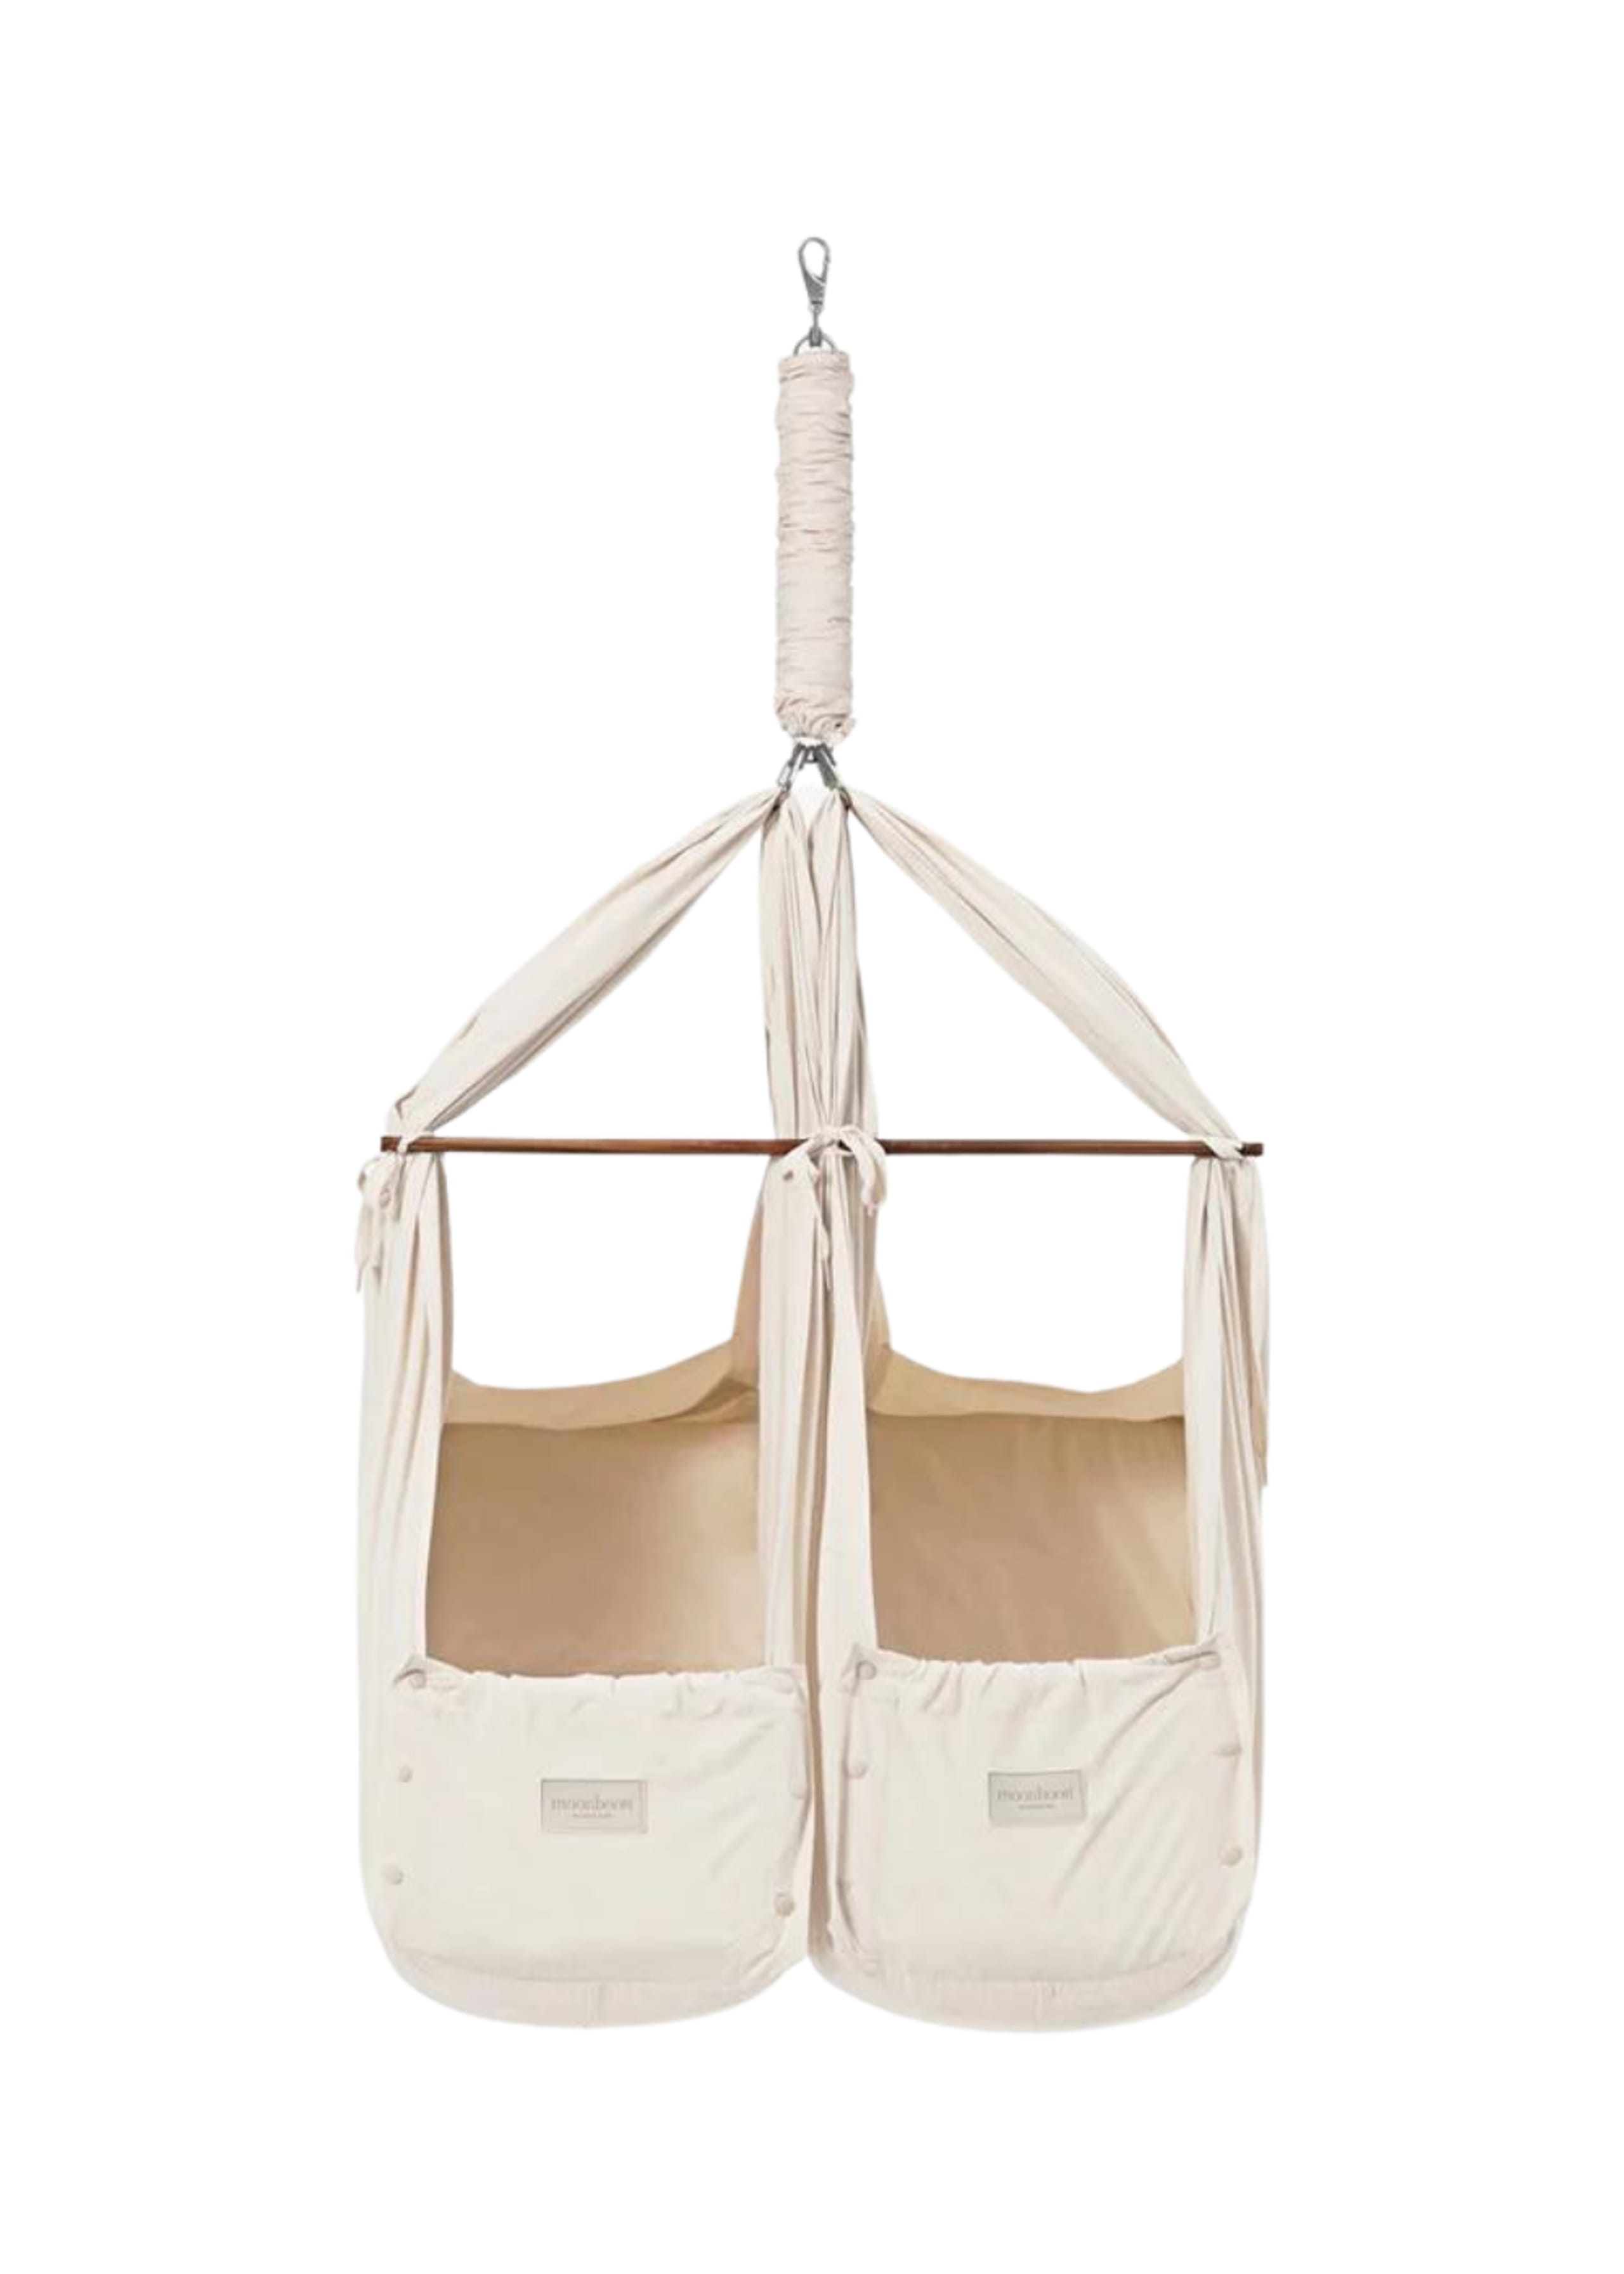 Moonboon - Chaise pour enfants - Twin Baby Hammock - Nature